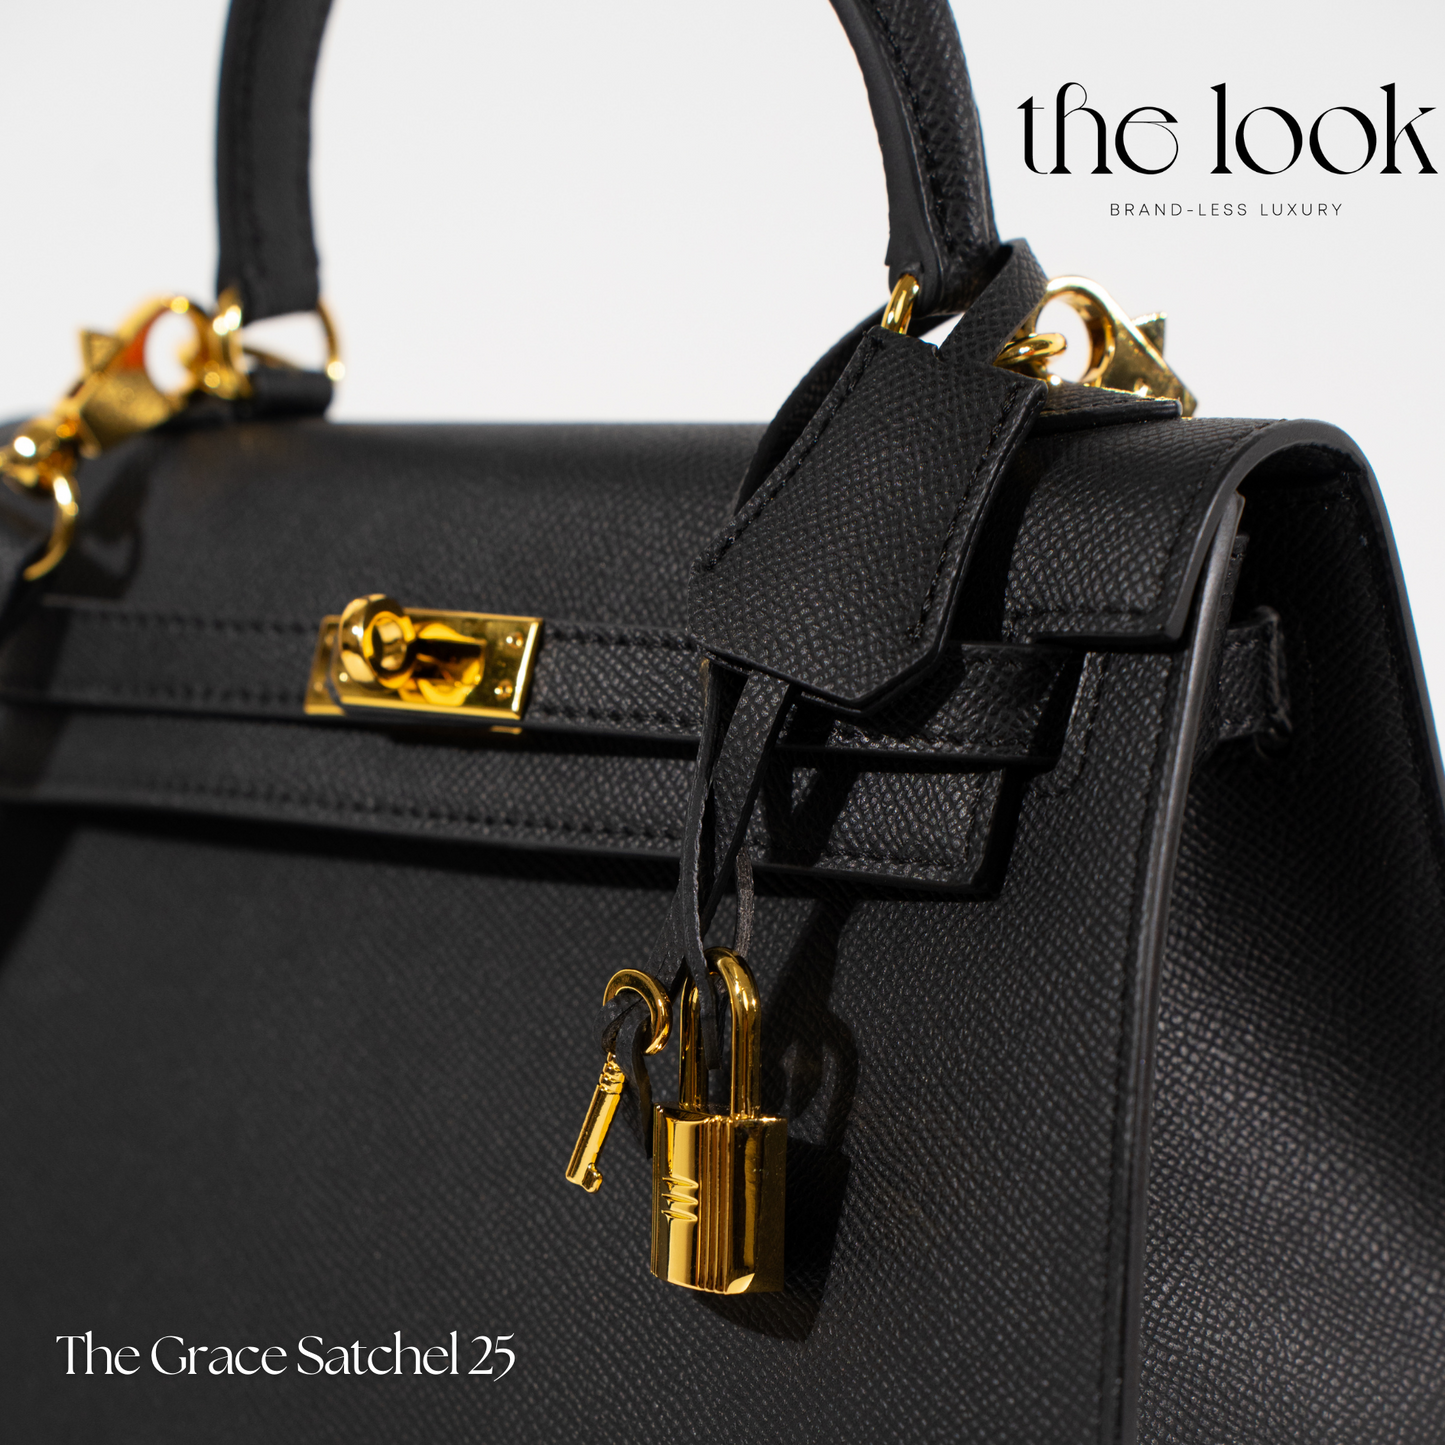 The Grace 25 Satchel Epsom Leather in Noir GHW by The Look